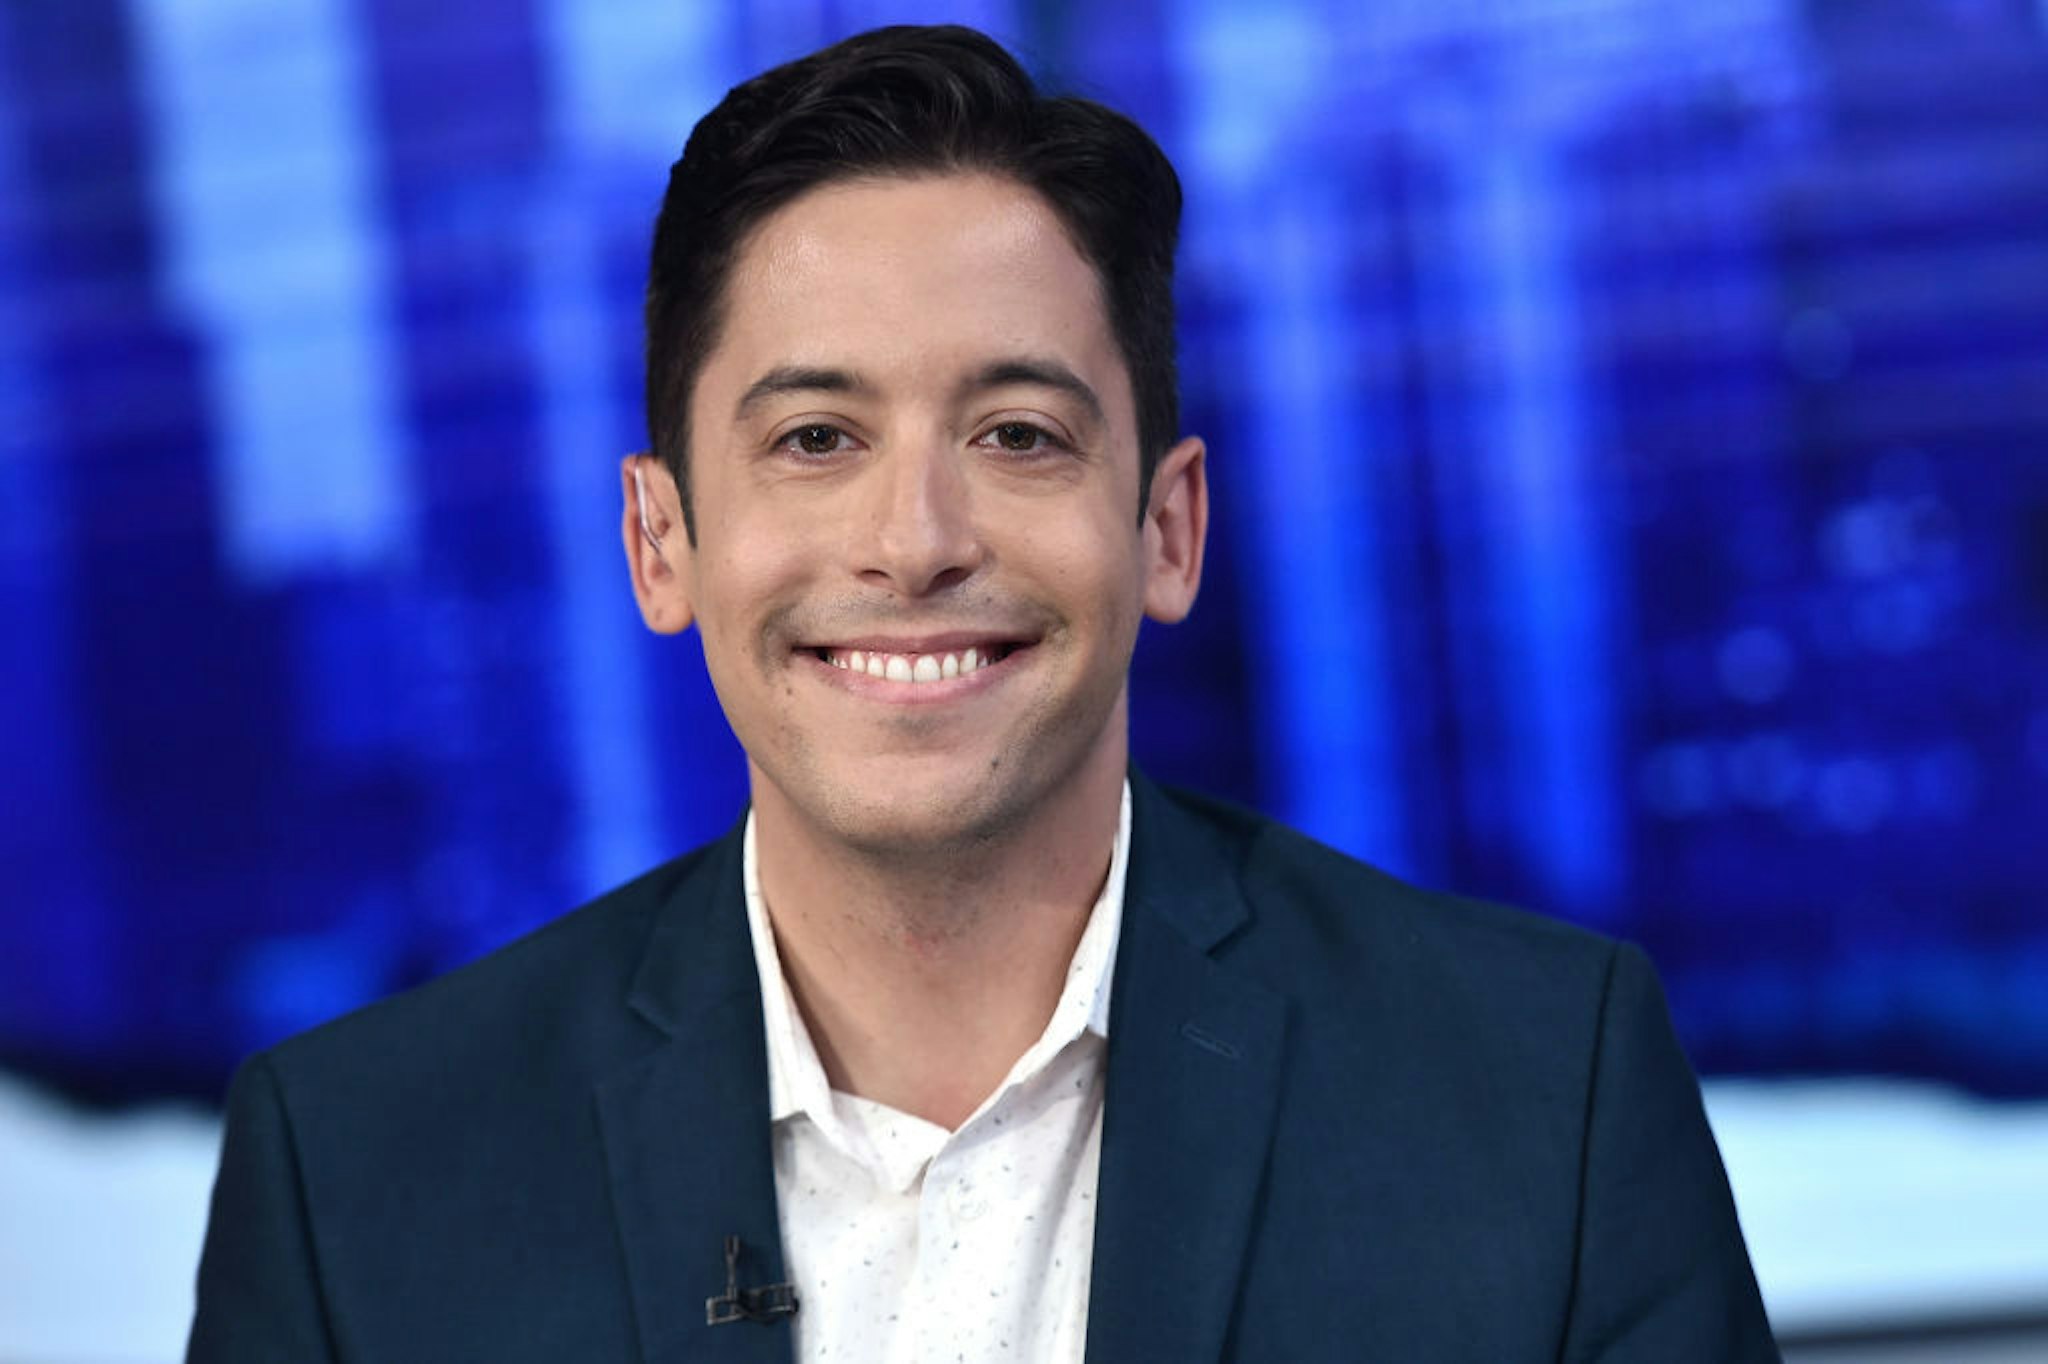 Michael Knowles visits "The Story with Martha MacCallum" in the Fox News Channel Studios on September 17, 2019 in New York City. (Photo by Steven Ferdman/Getty Images)